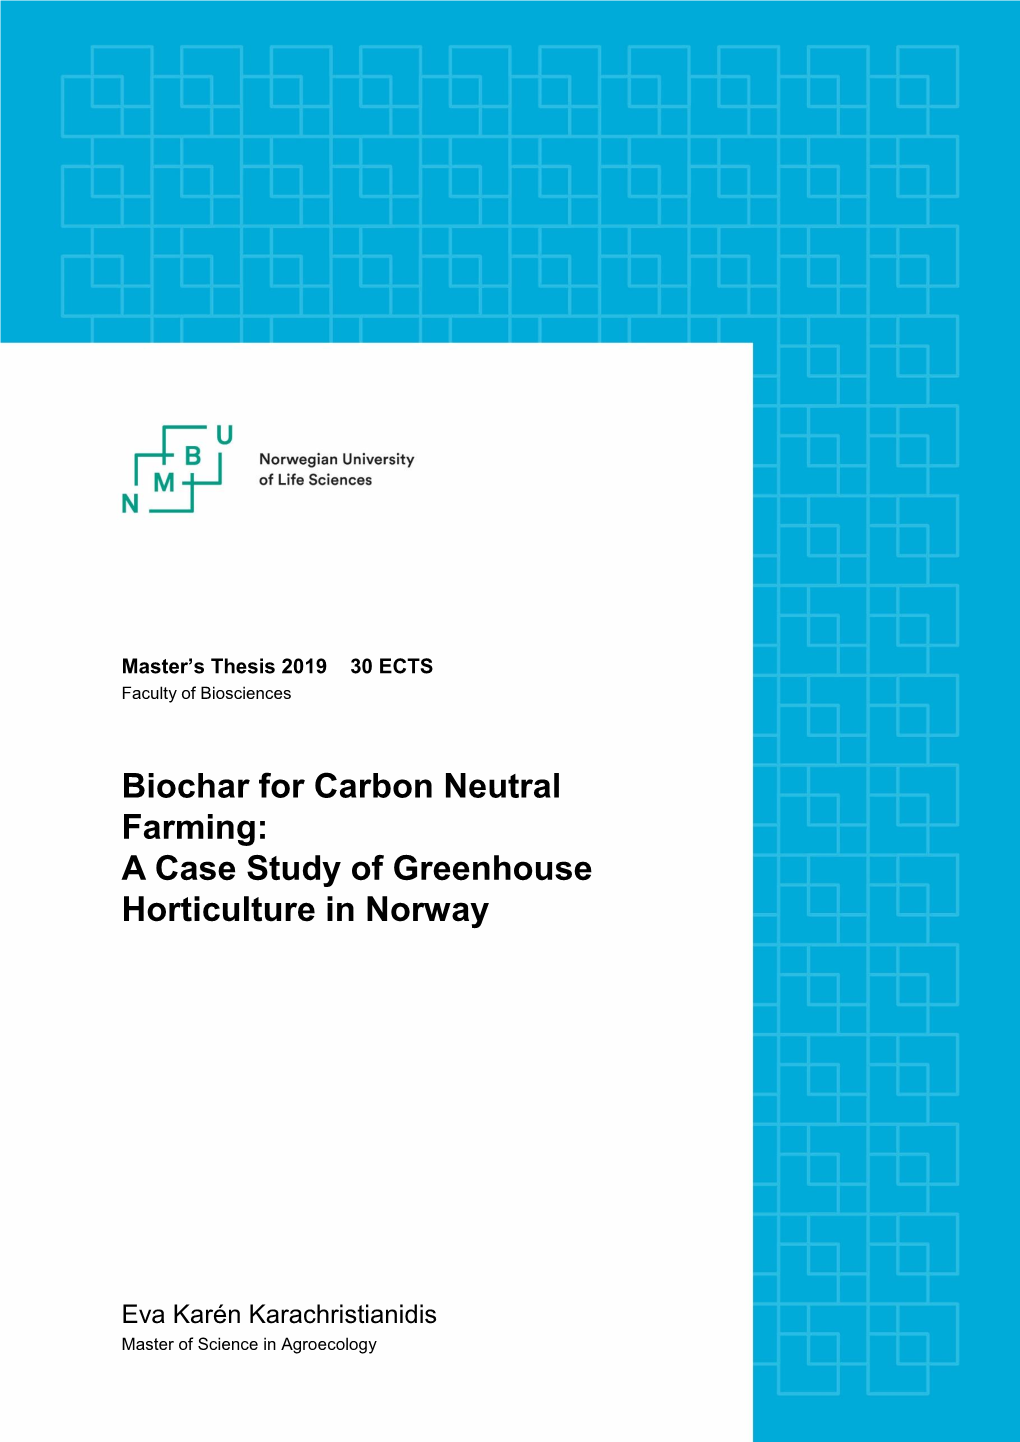 Biochar for Carbon Neutral Farming: a Case Study of Greenhouse Horticulture in Norway